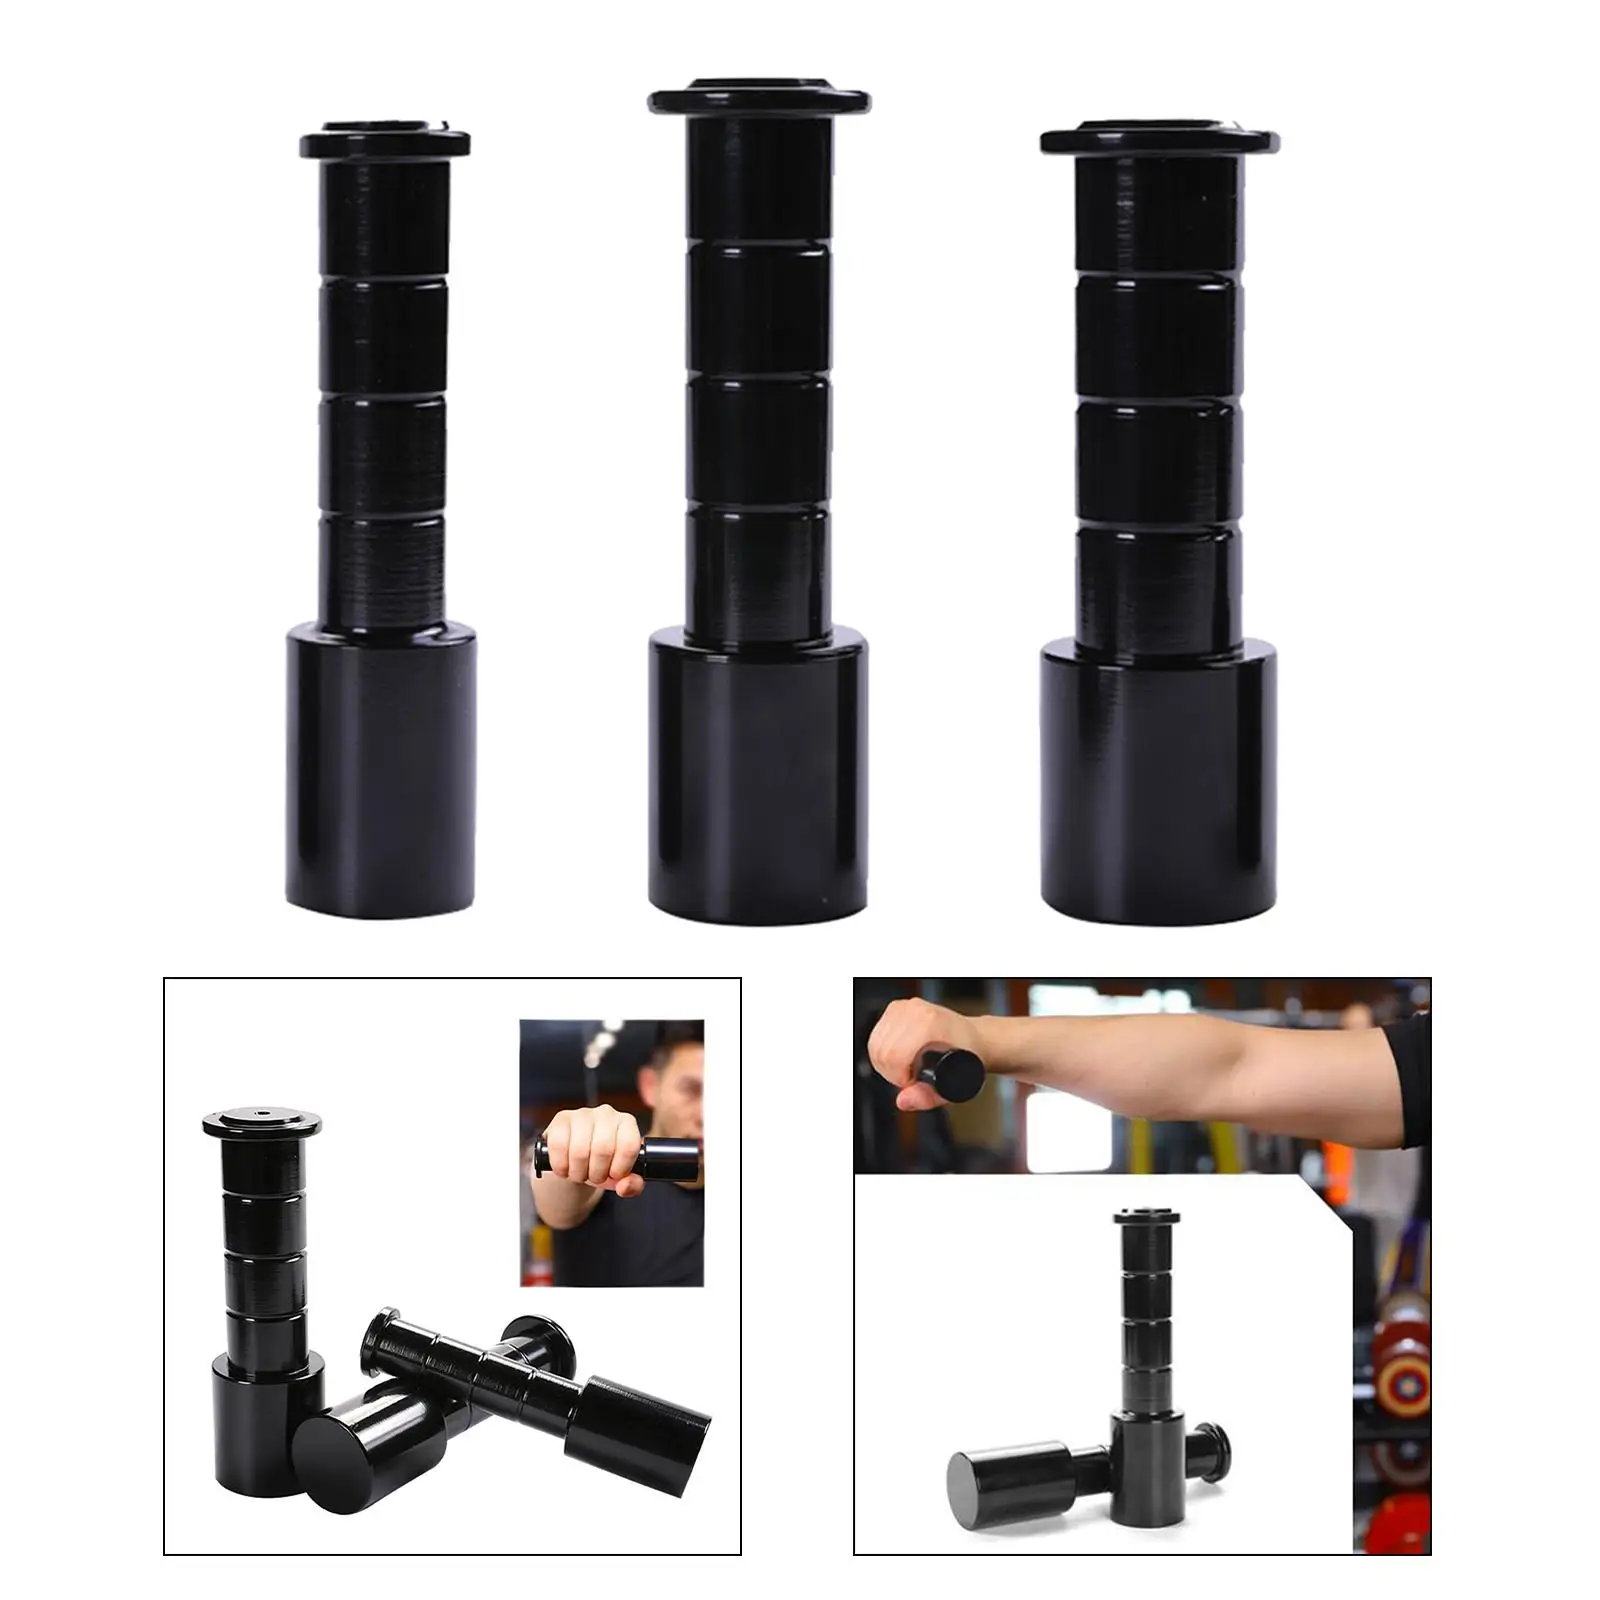 Boxing Slide Grip Body Building Hand Weight for Home Gym Exercise Walking